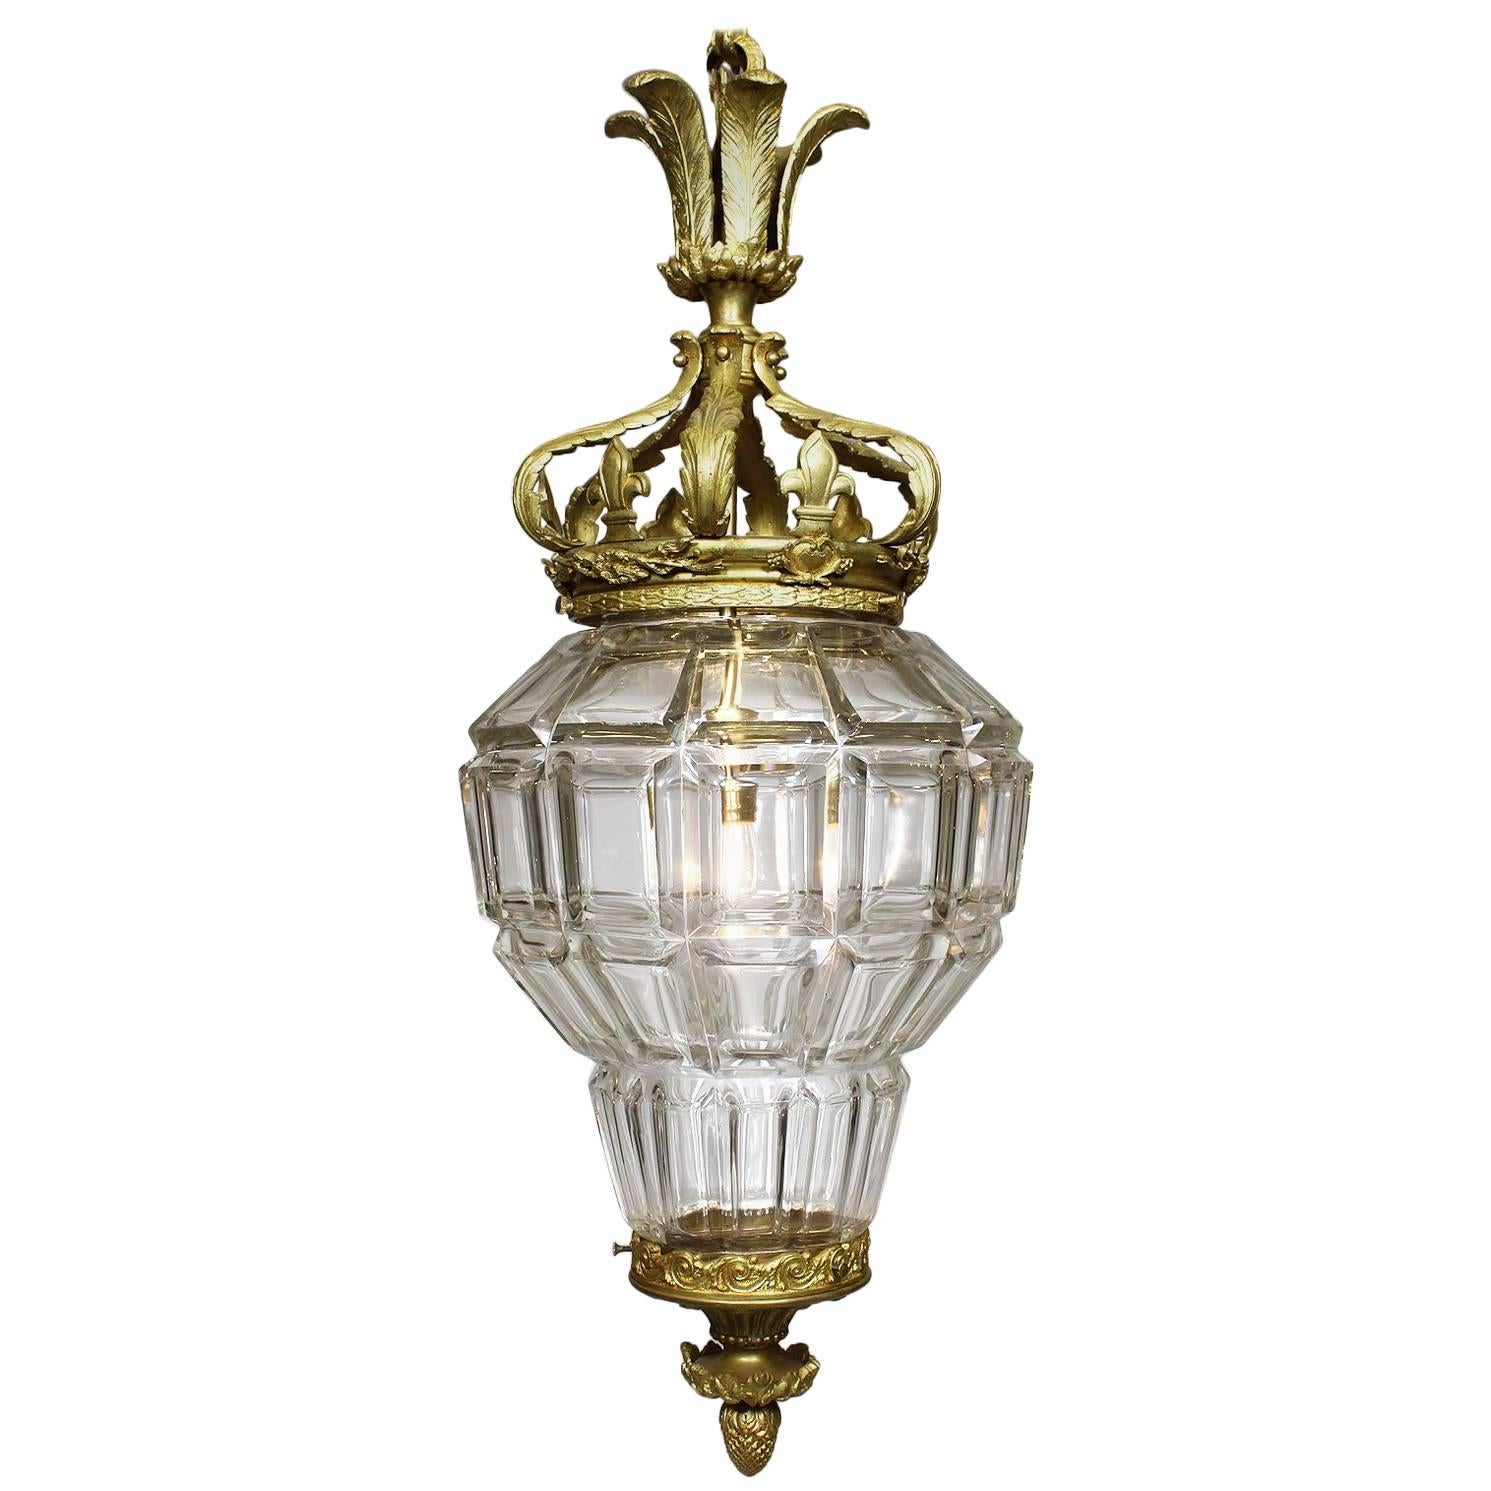 French 19th-20th Century Gilt-Bronze and Cut-Glass "Versailles" Style Lantern For Sale